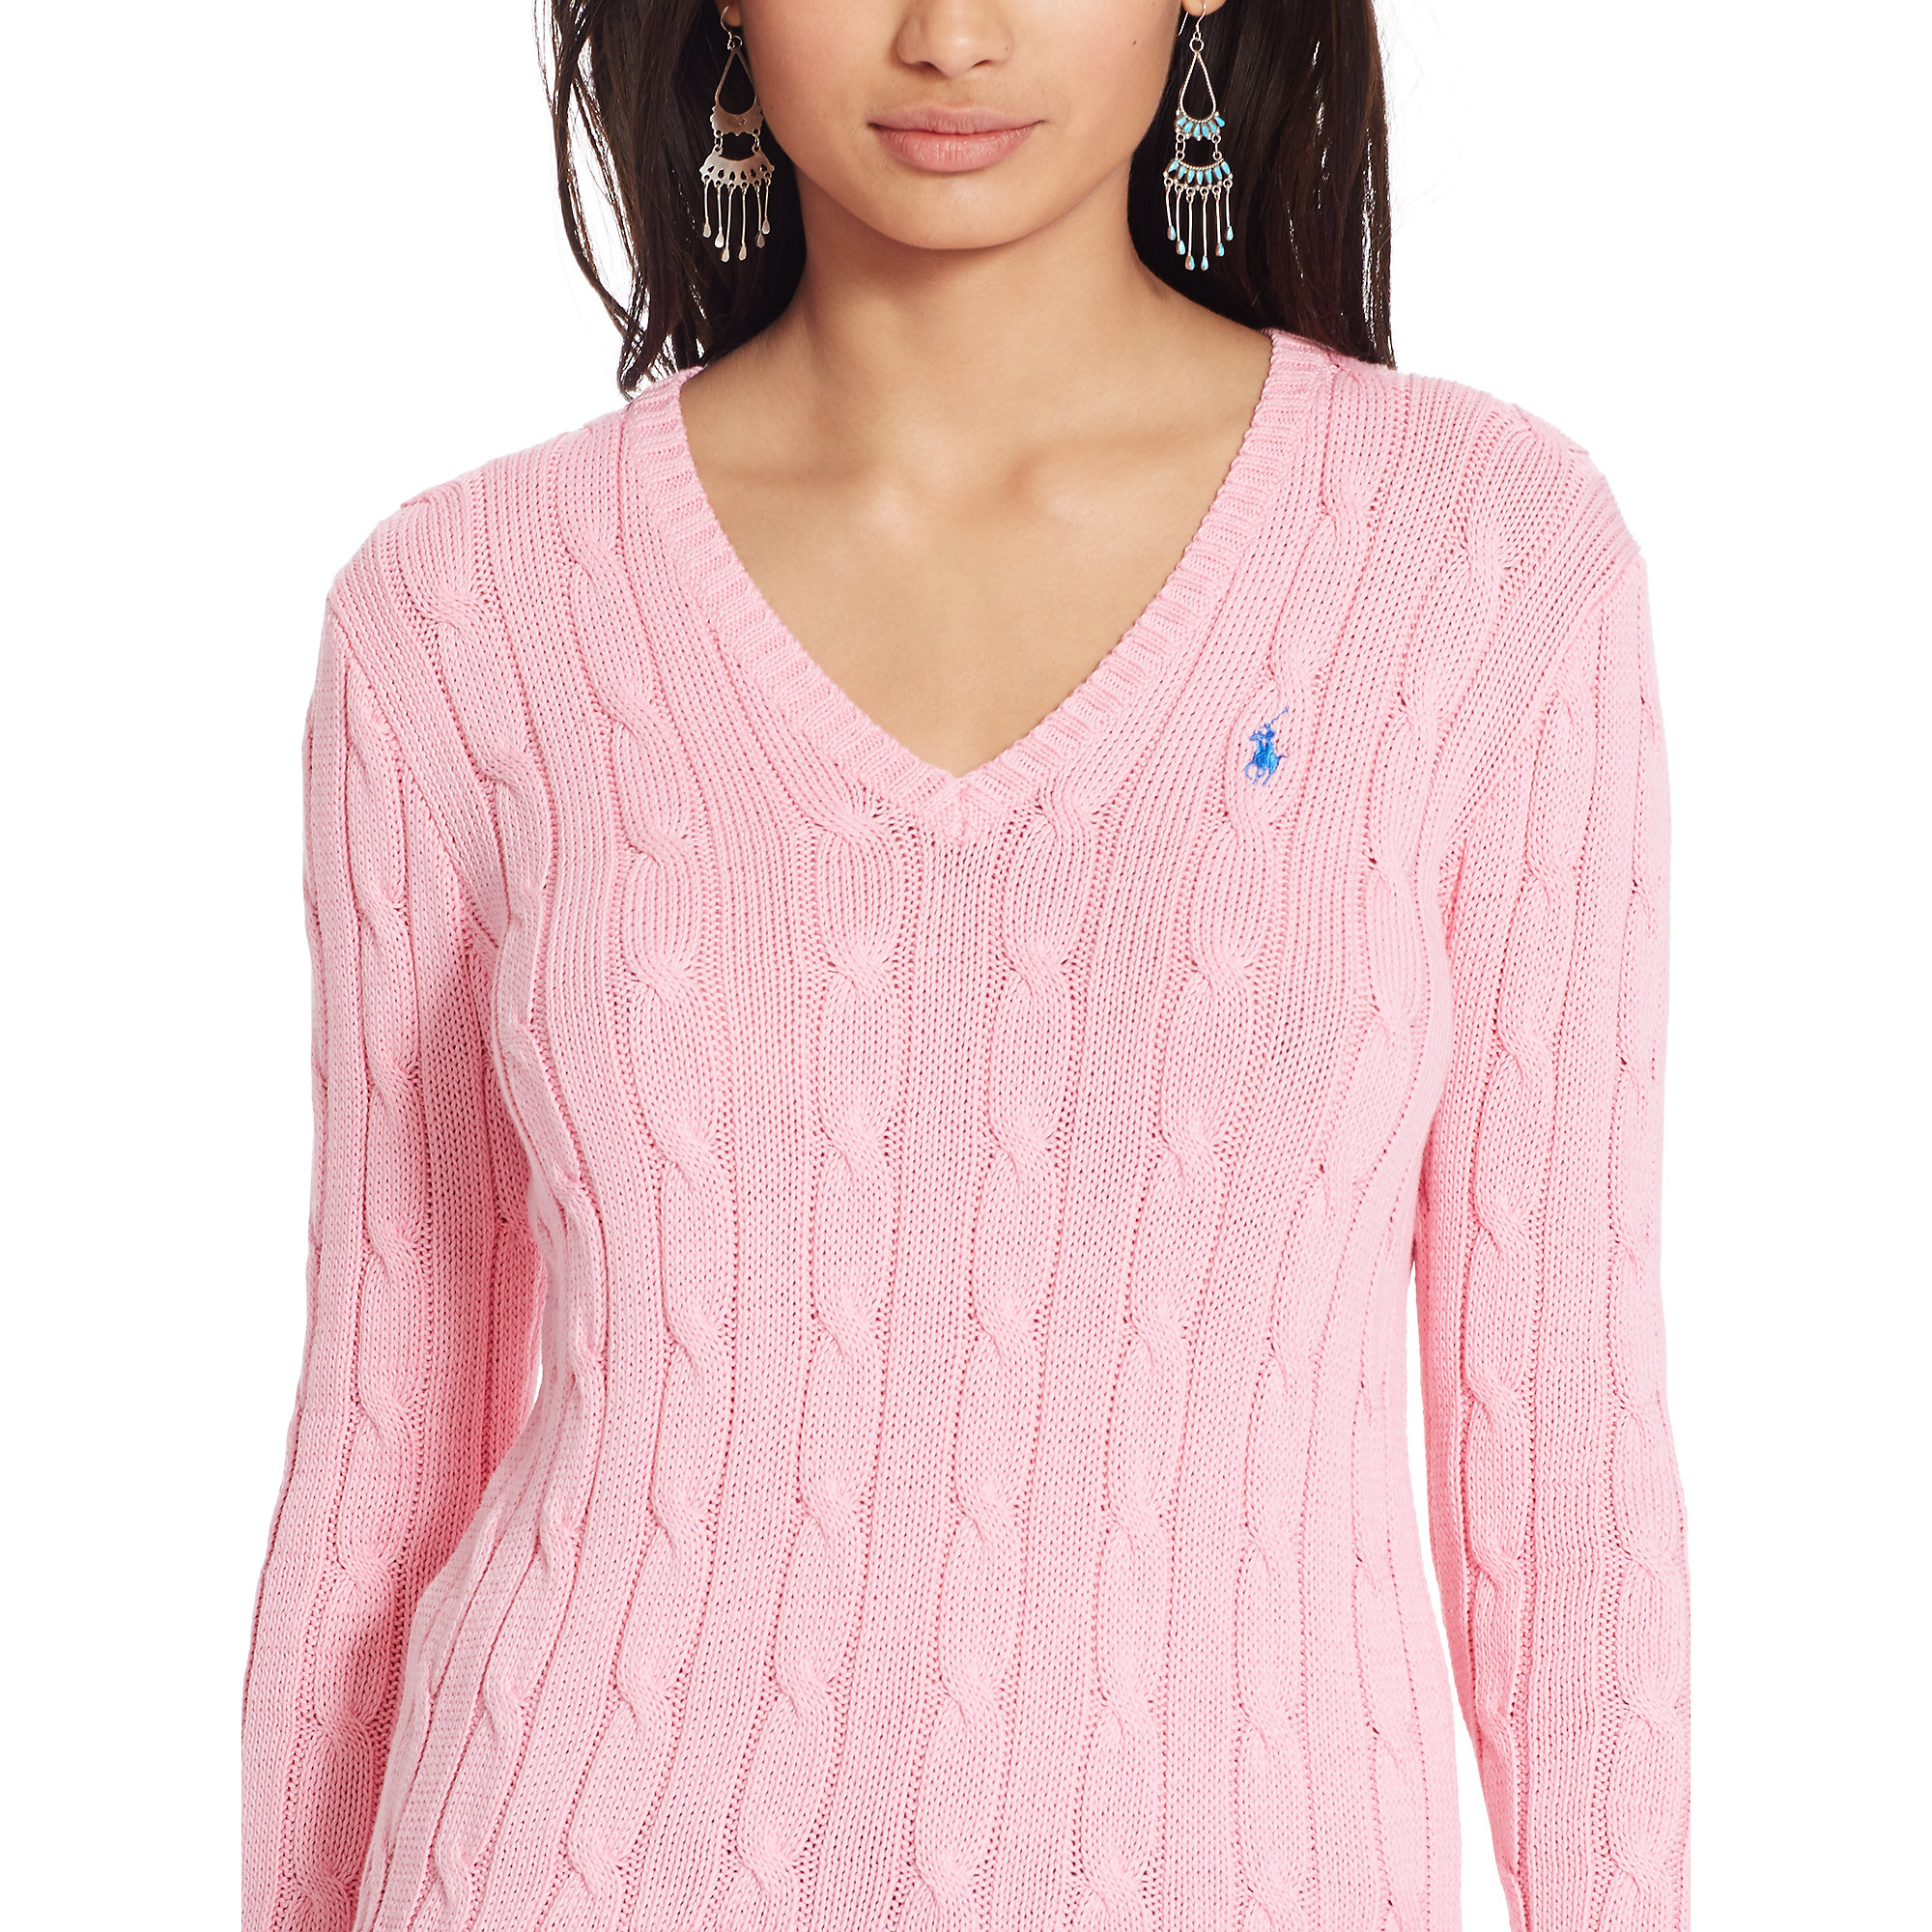 Lyst - Polo ralph lauren Cable-knit V-neck Sweater in Pink